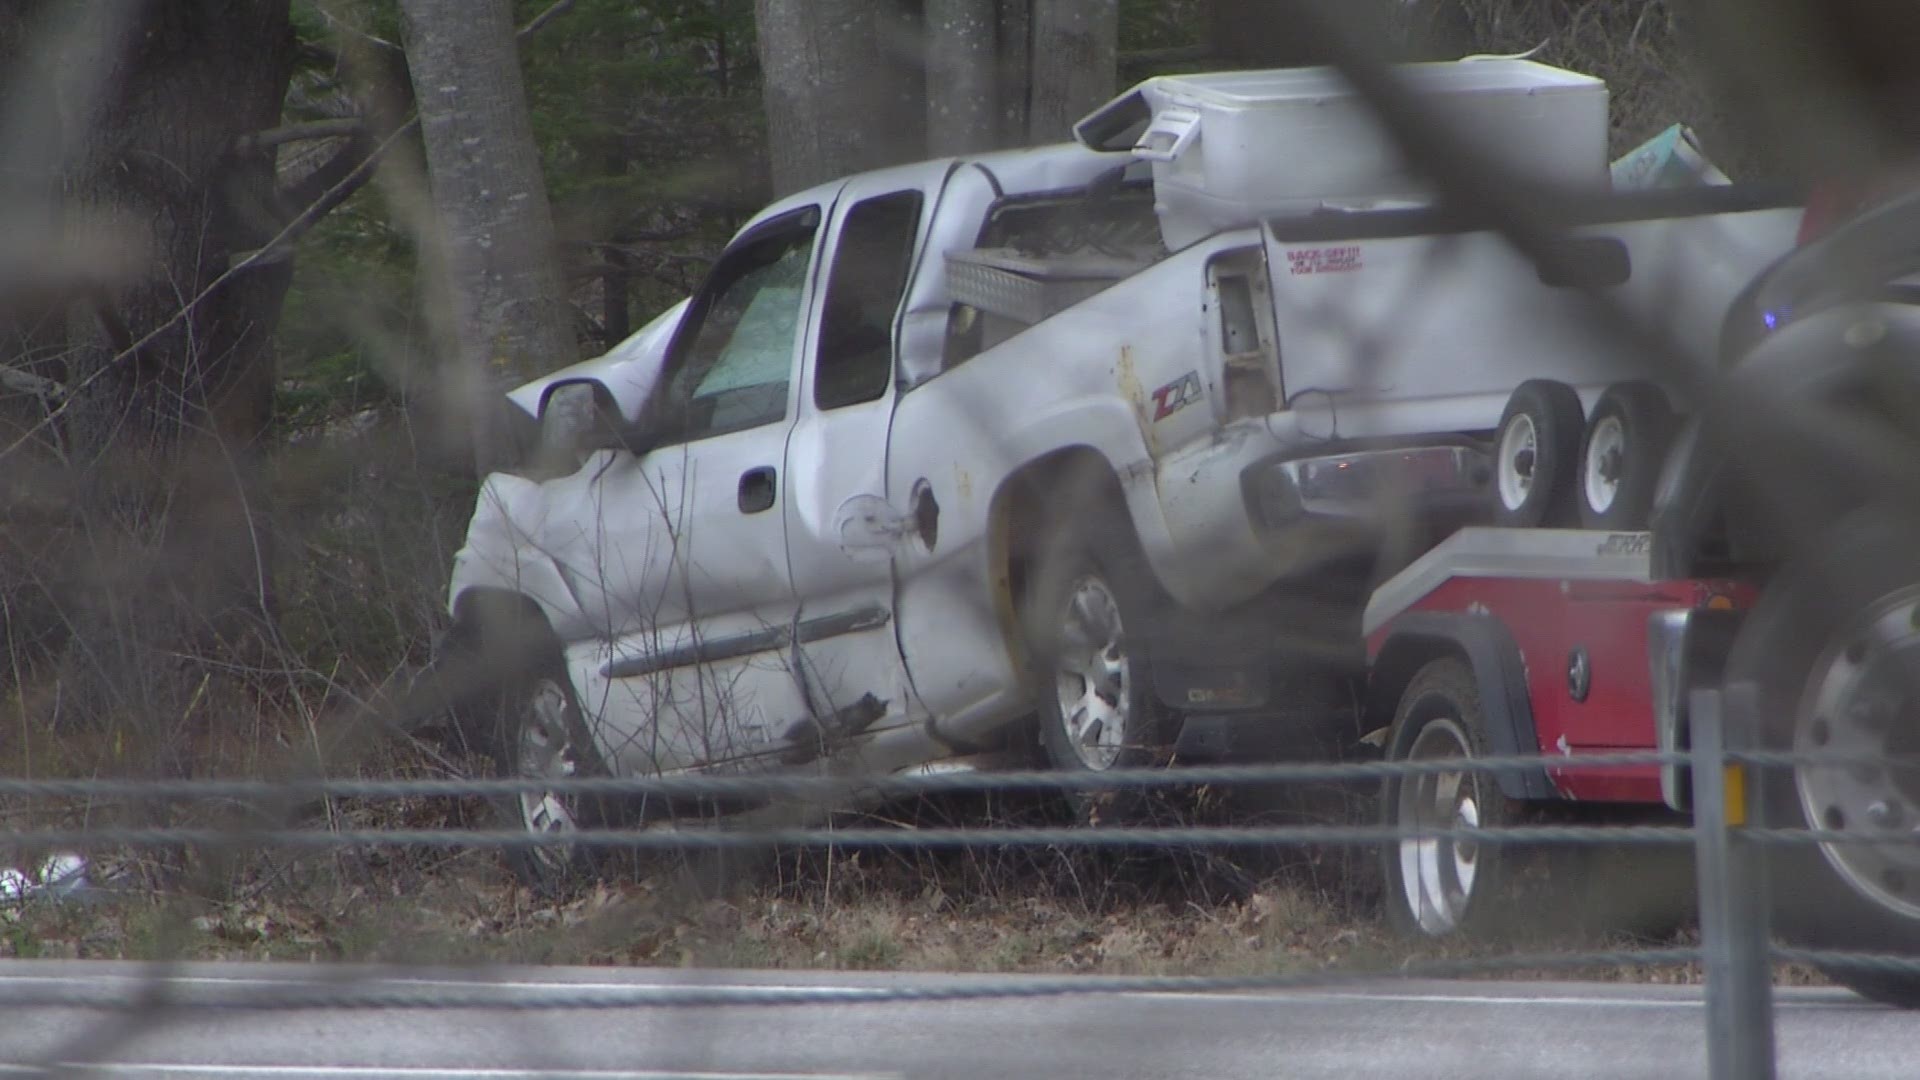 State Police are responding to an accident on I-295 southbound in Yarmouth.